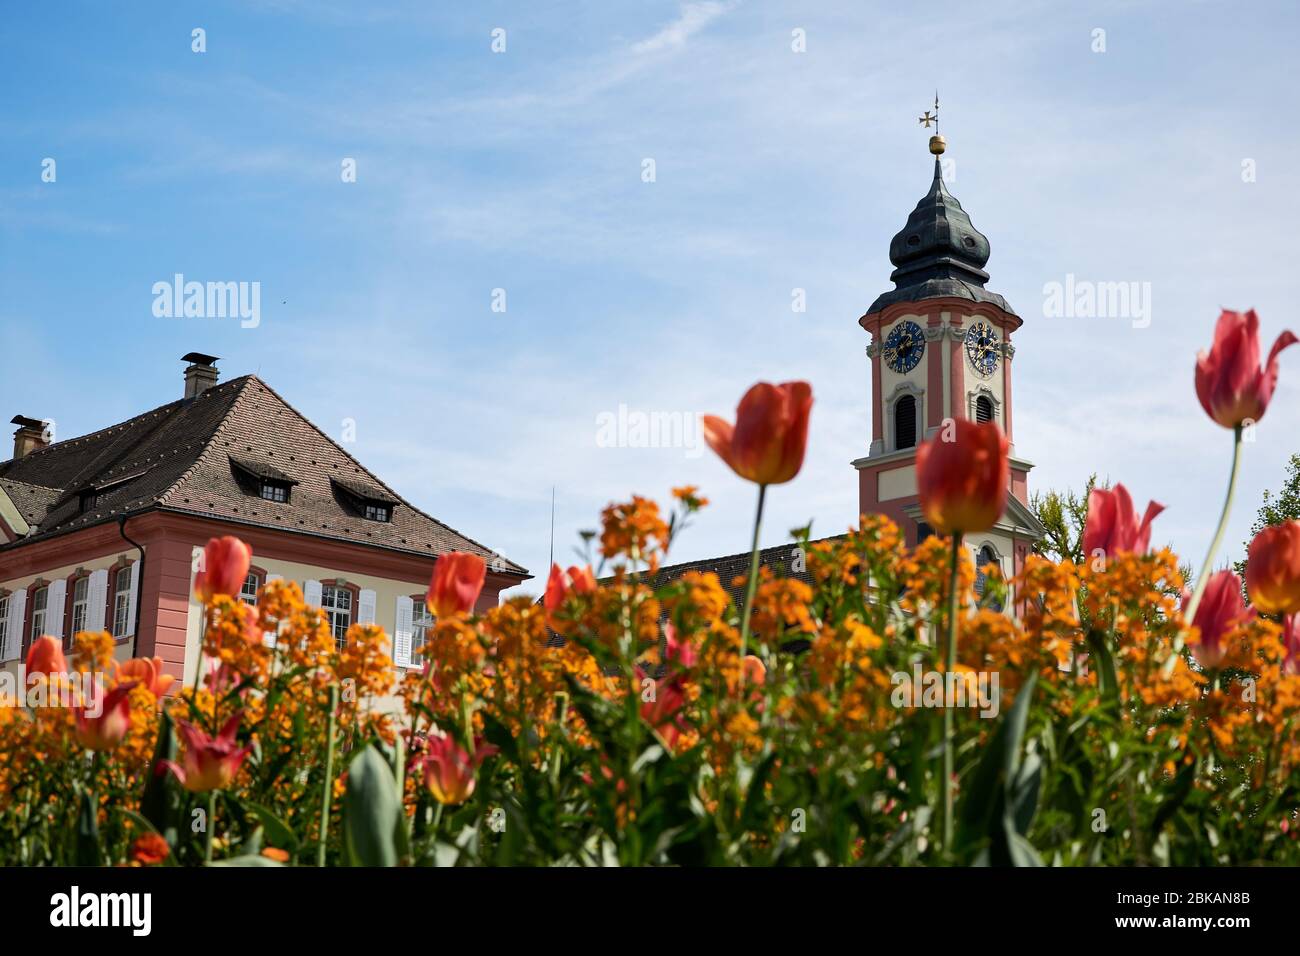 Baroque castle with colorful tulips at Island Mainau - a 'flowering island' notable for its parks and gardens located at Lake Constance, Germany Stock Photo